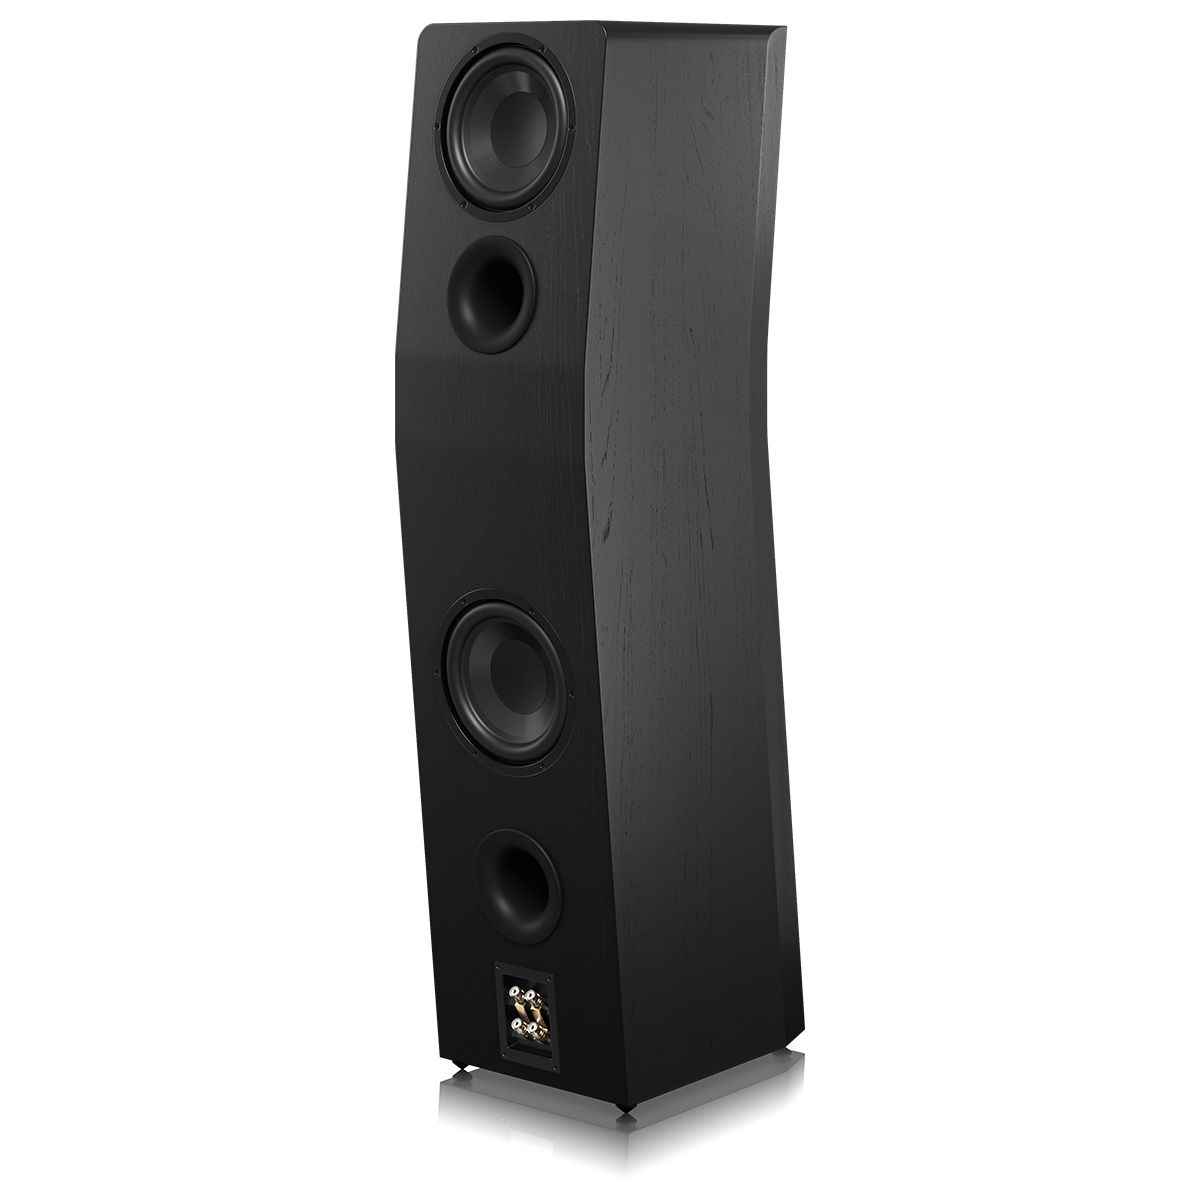 SVS Ultra Evolution Pinnacle Floorstanding Loudspeaker - single black oak with grille - angled rear view with components